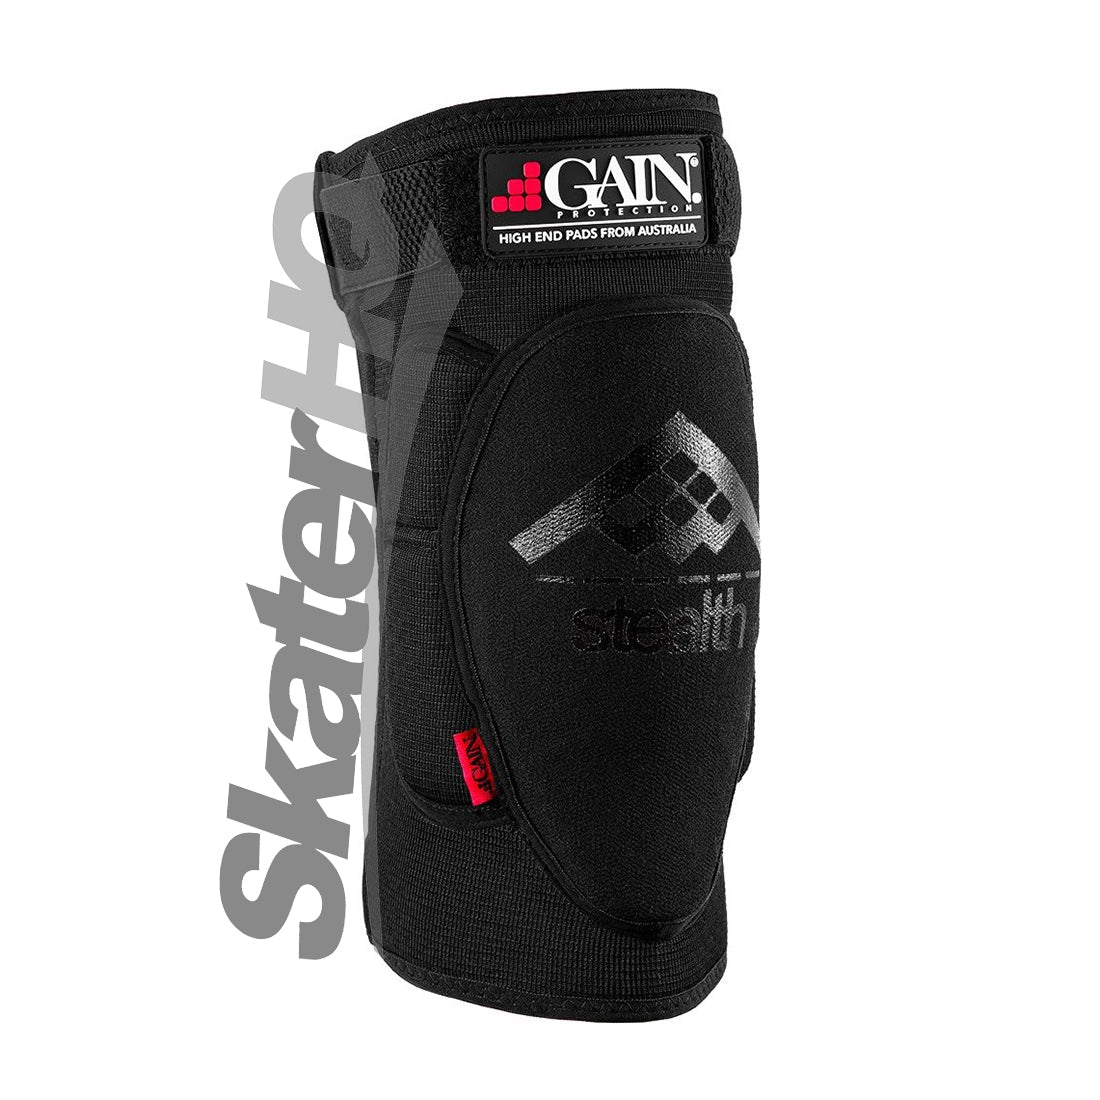 GAIN Stealth Knee Pads - Black - L Protective Gear